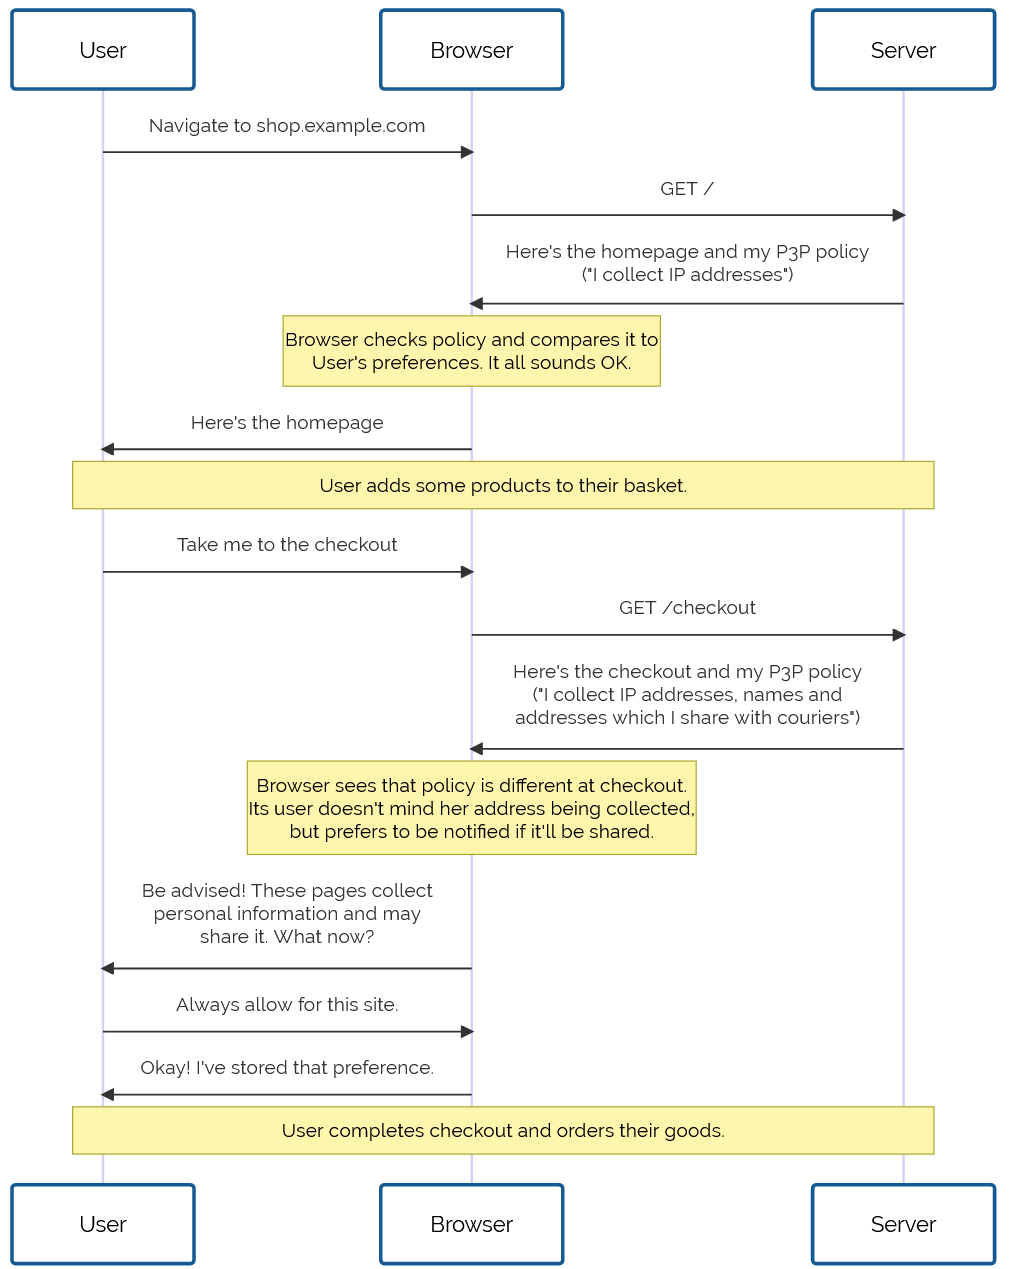 Flowchart showing the negotiation process between a user, browser, and server as the user browses an ecommerce site. The homepage's P3P policy states that it collects IP addresses, which is compatible with the user's preferences. Later, at checkout, the P3P policy states that the user's address will be collected and shared with a courier. The collection is fine according to the user's preferences, but she's asked to be notified if it'll be shared, so the browser notifies the user. The user approves of the policy and asks that this approval is remembered for this site, and the checkout process continues.